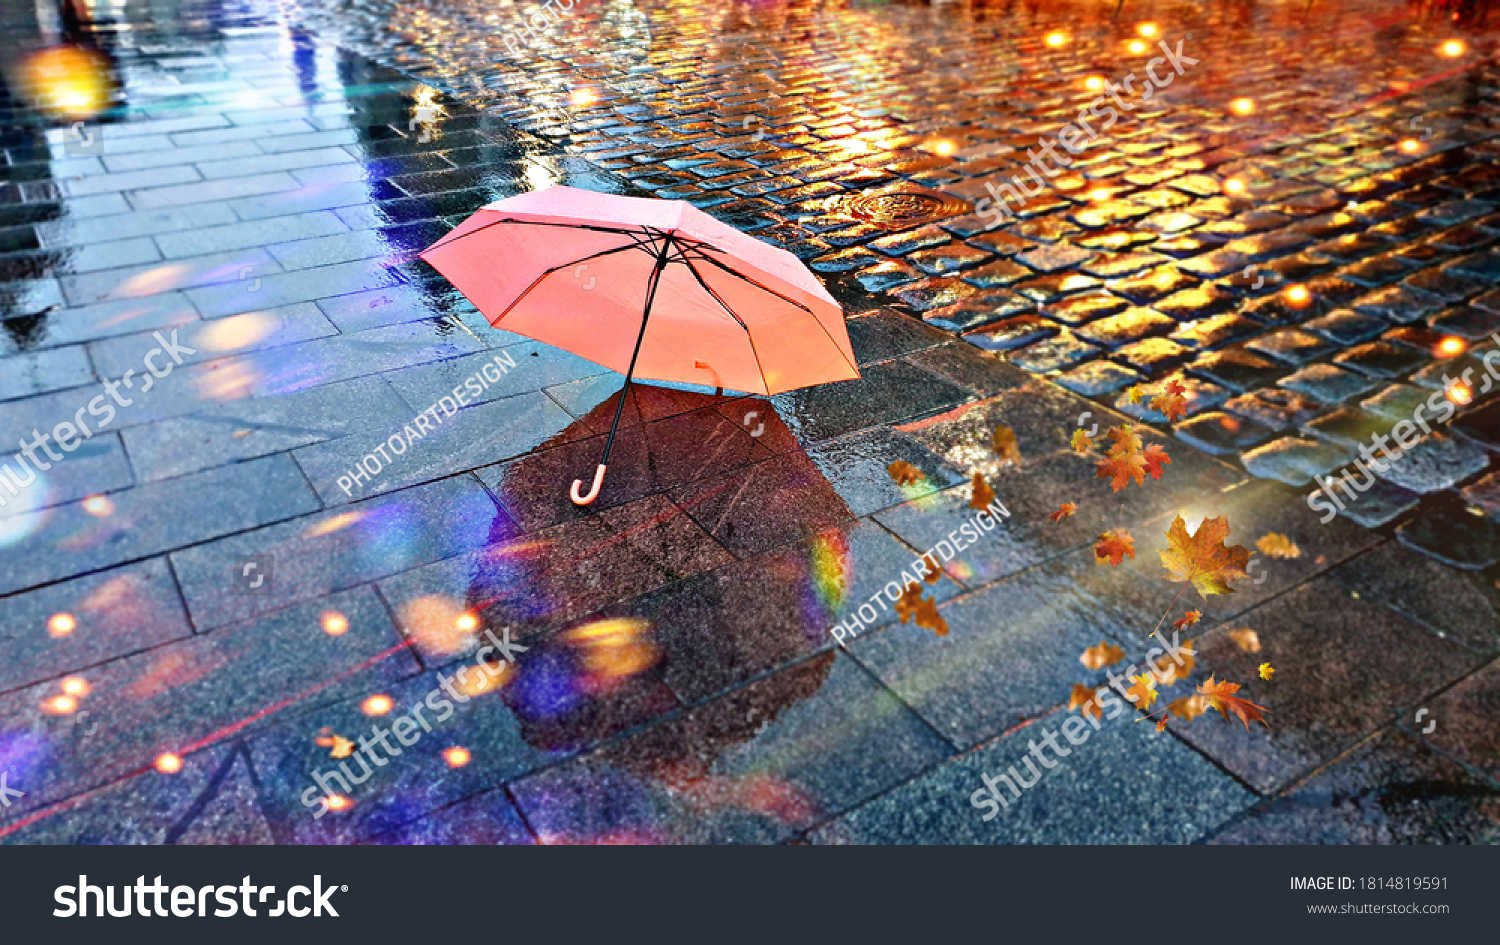 Rainy  Weather ,Autumn leaves falling  on road , pink umbrella on pavement city night light blurred at evening  #1814819591